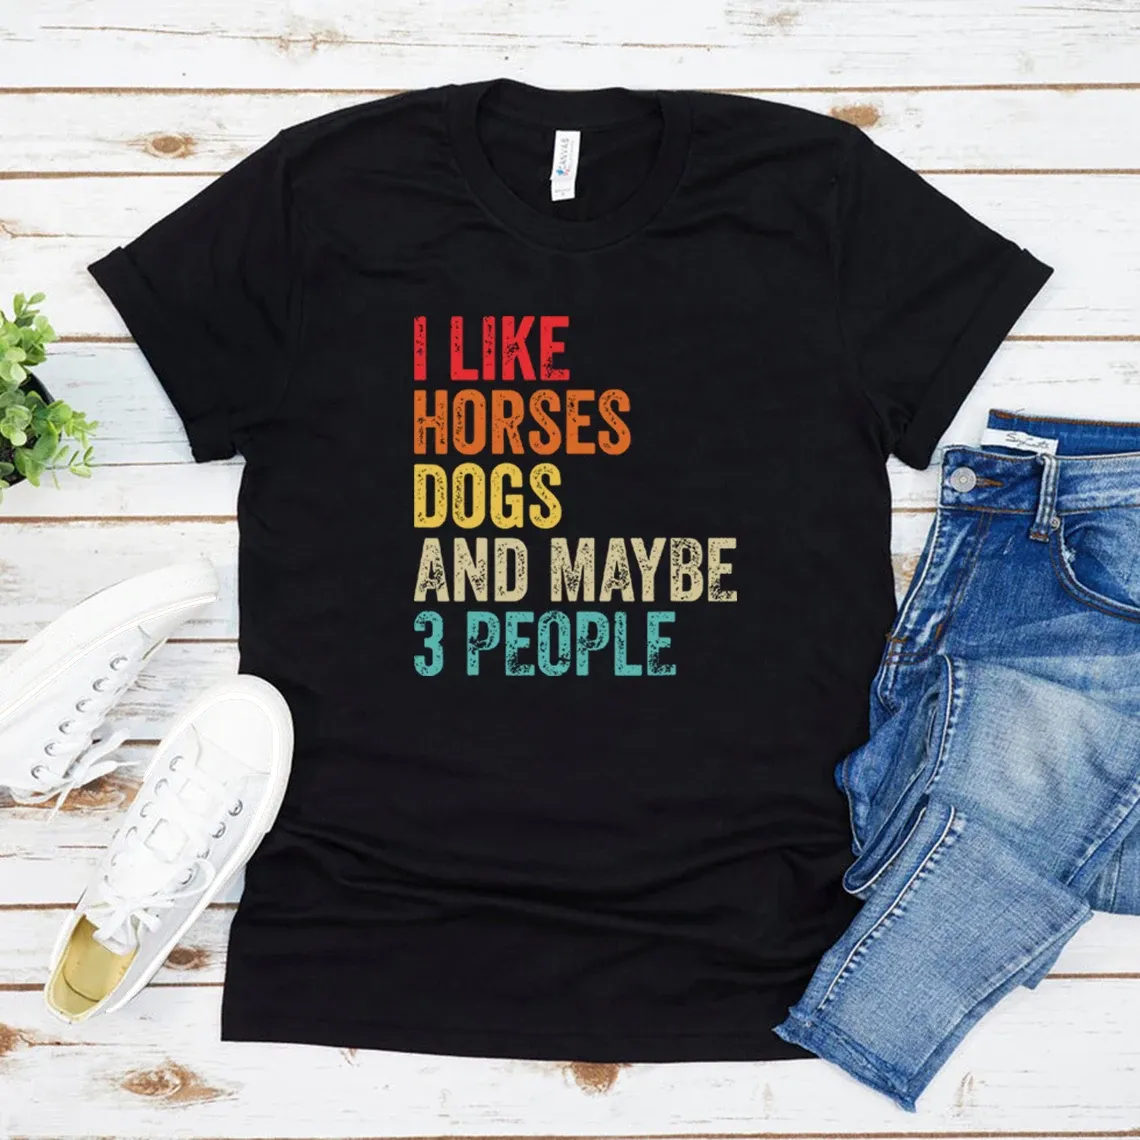 T-shirt I Like Horses Dogs and Maybe 3 People T Shirt Horse Lover Tshirt Girls Horse Shirt Unisex Graphic Tee Vintage Short Sleeve Tops